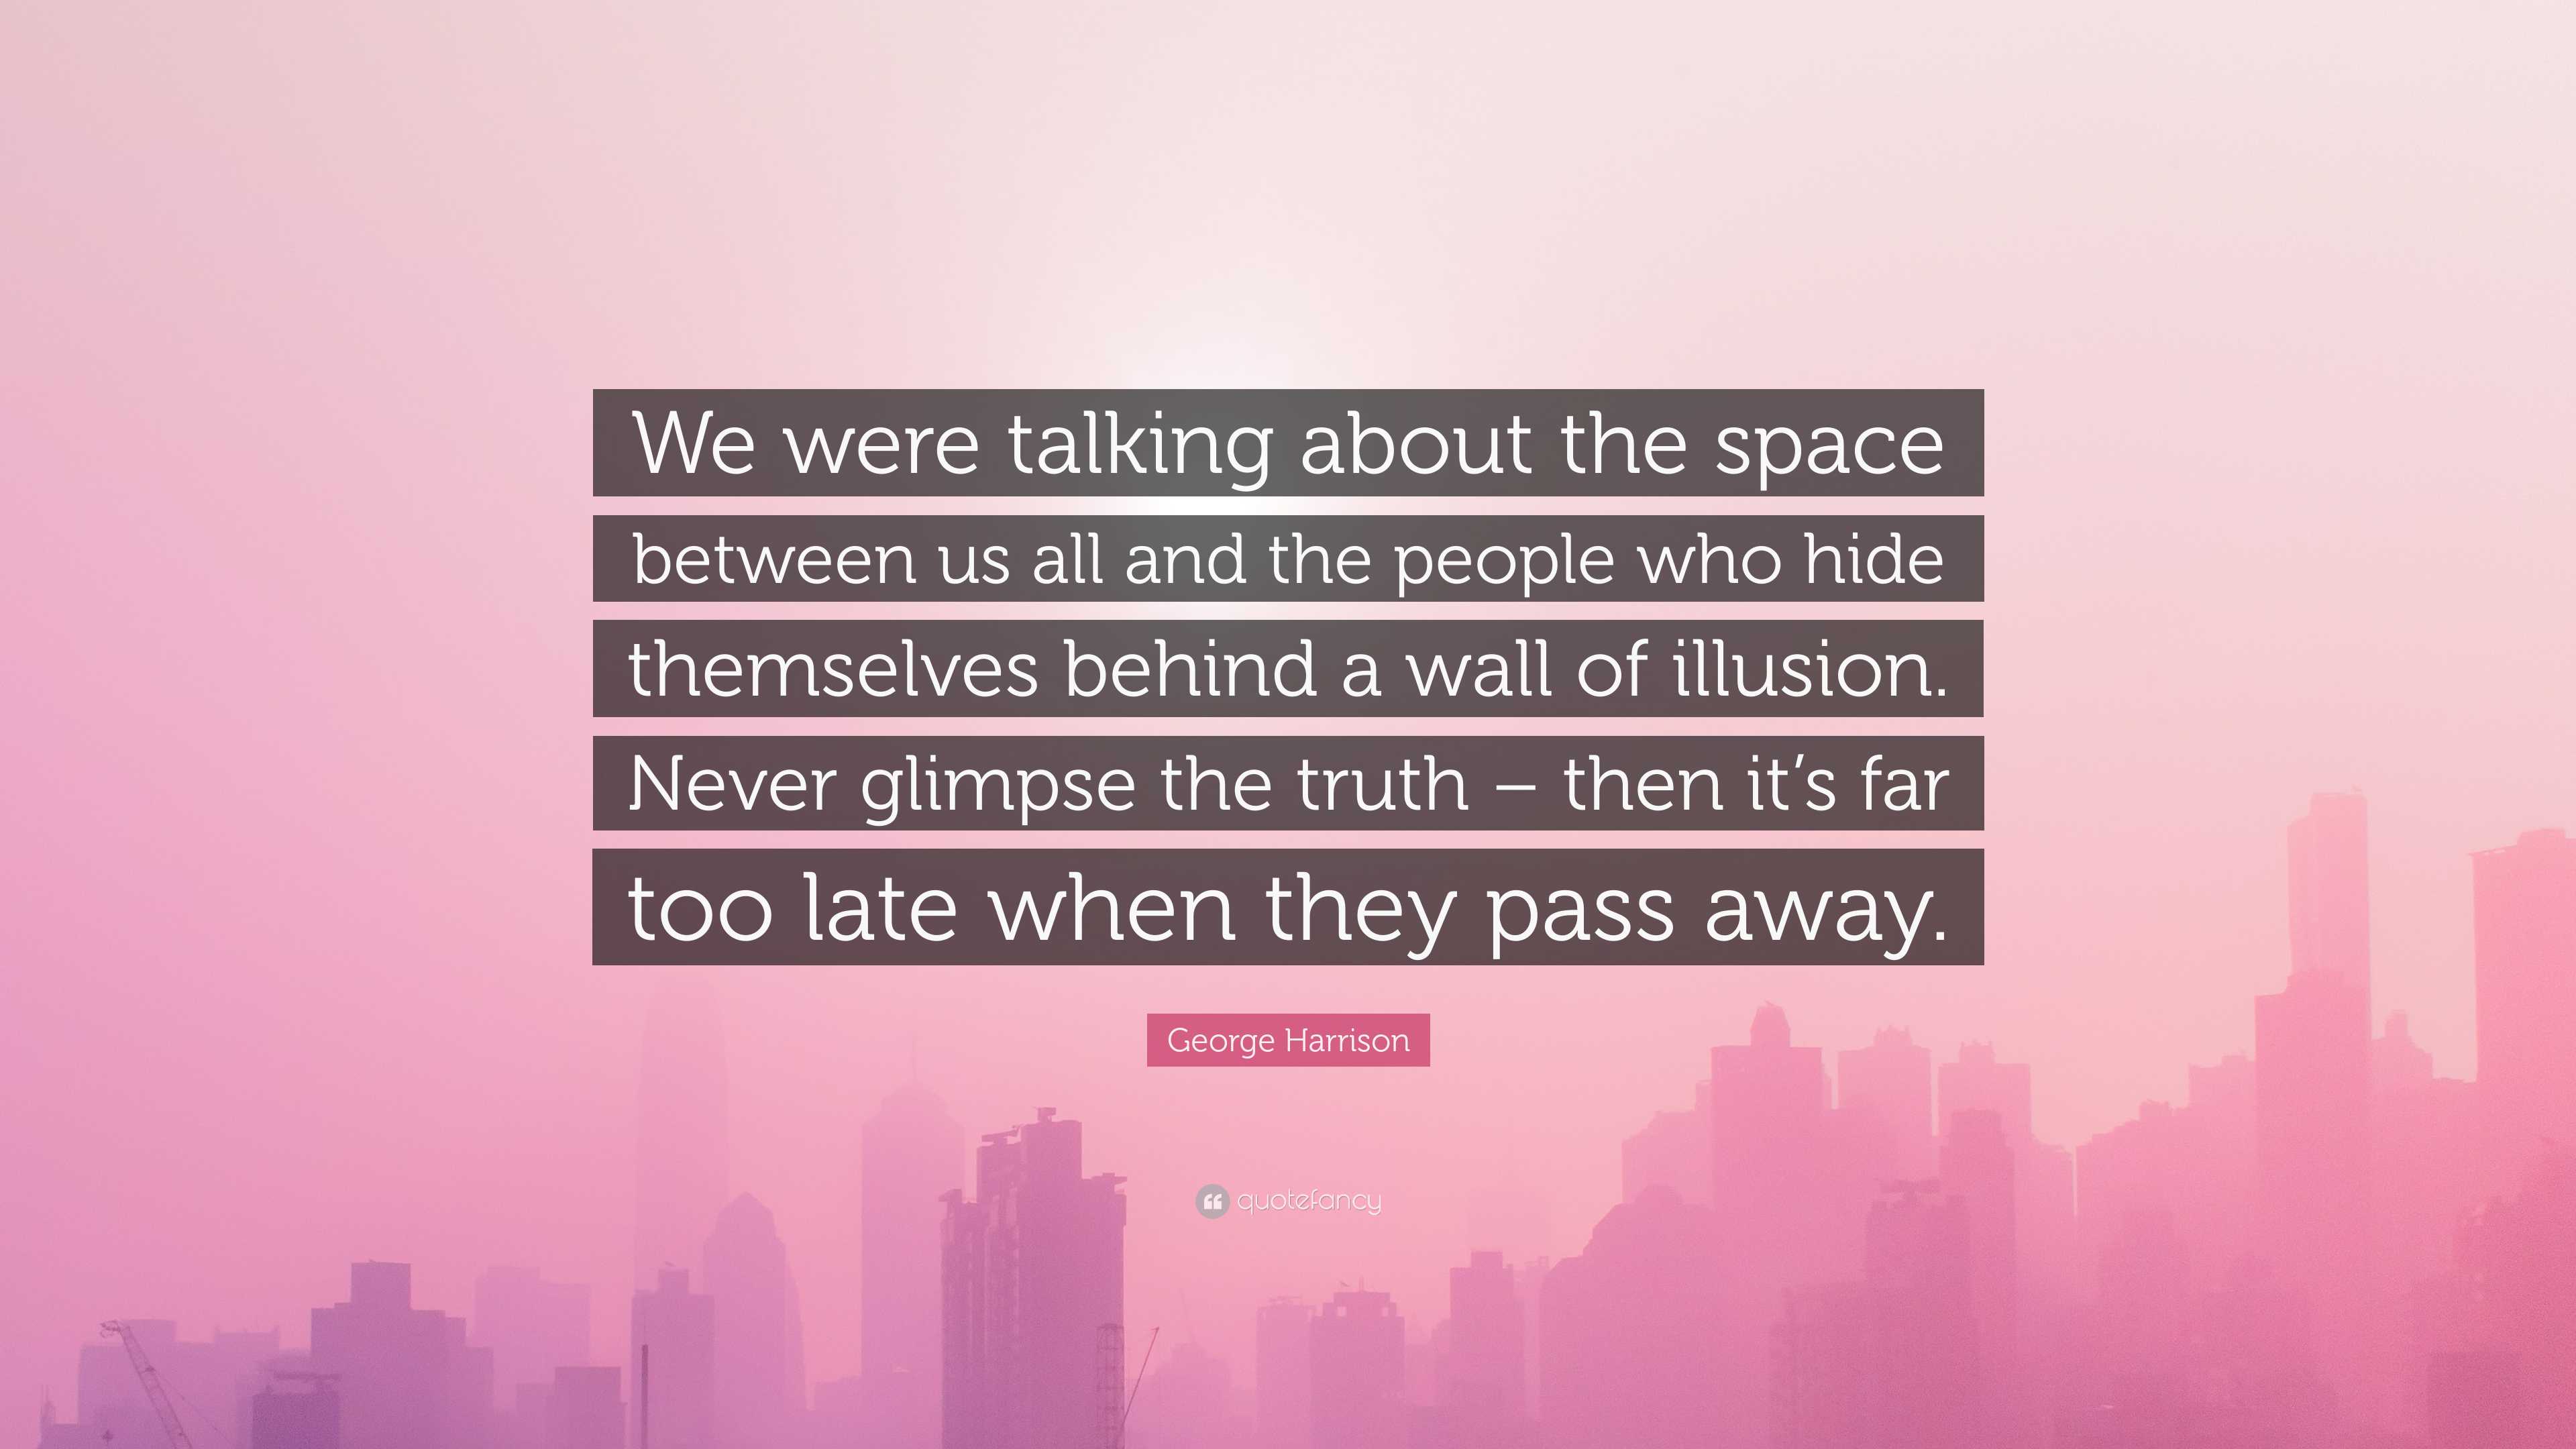 About  The Space Between